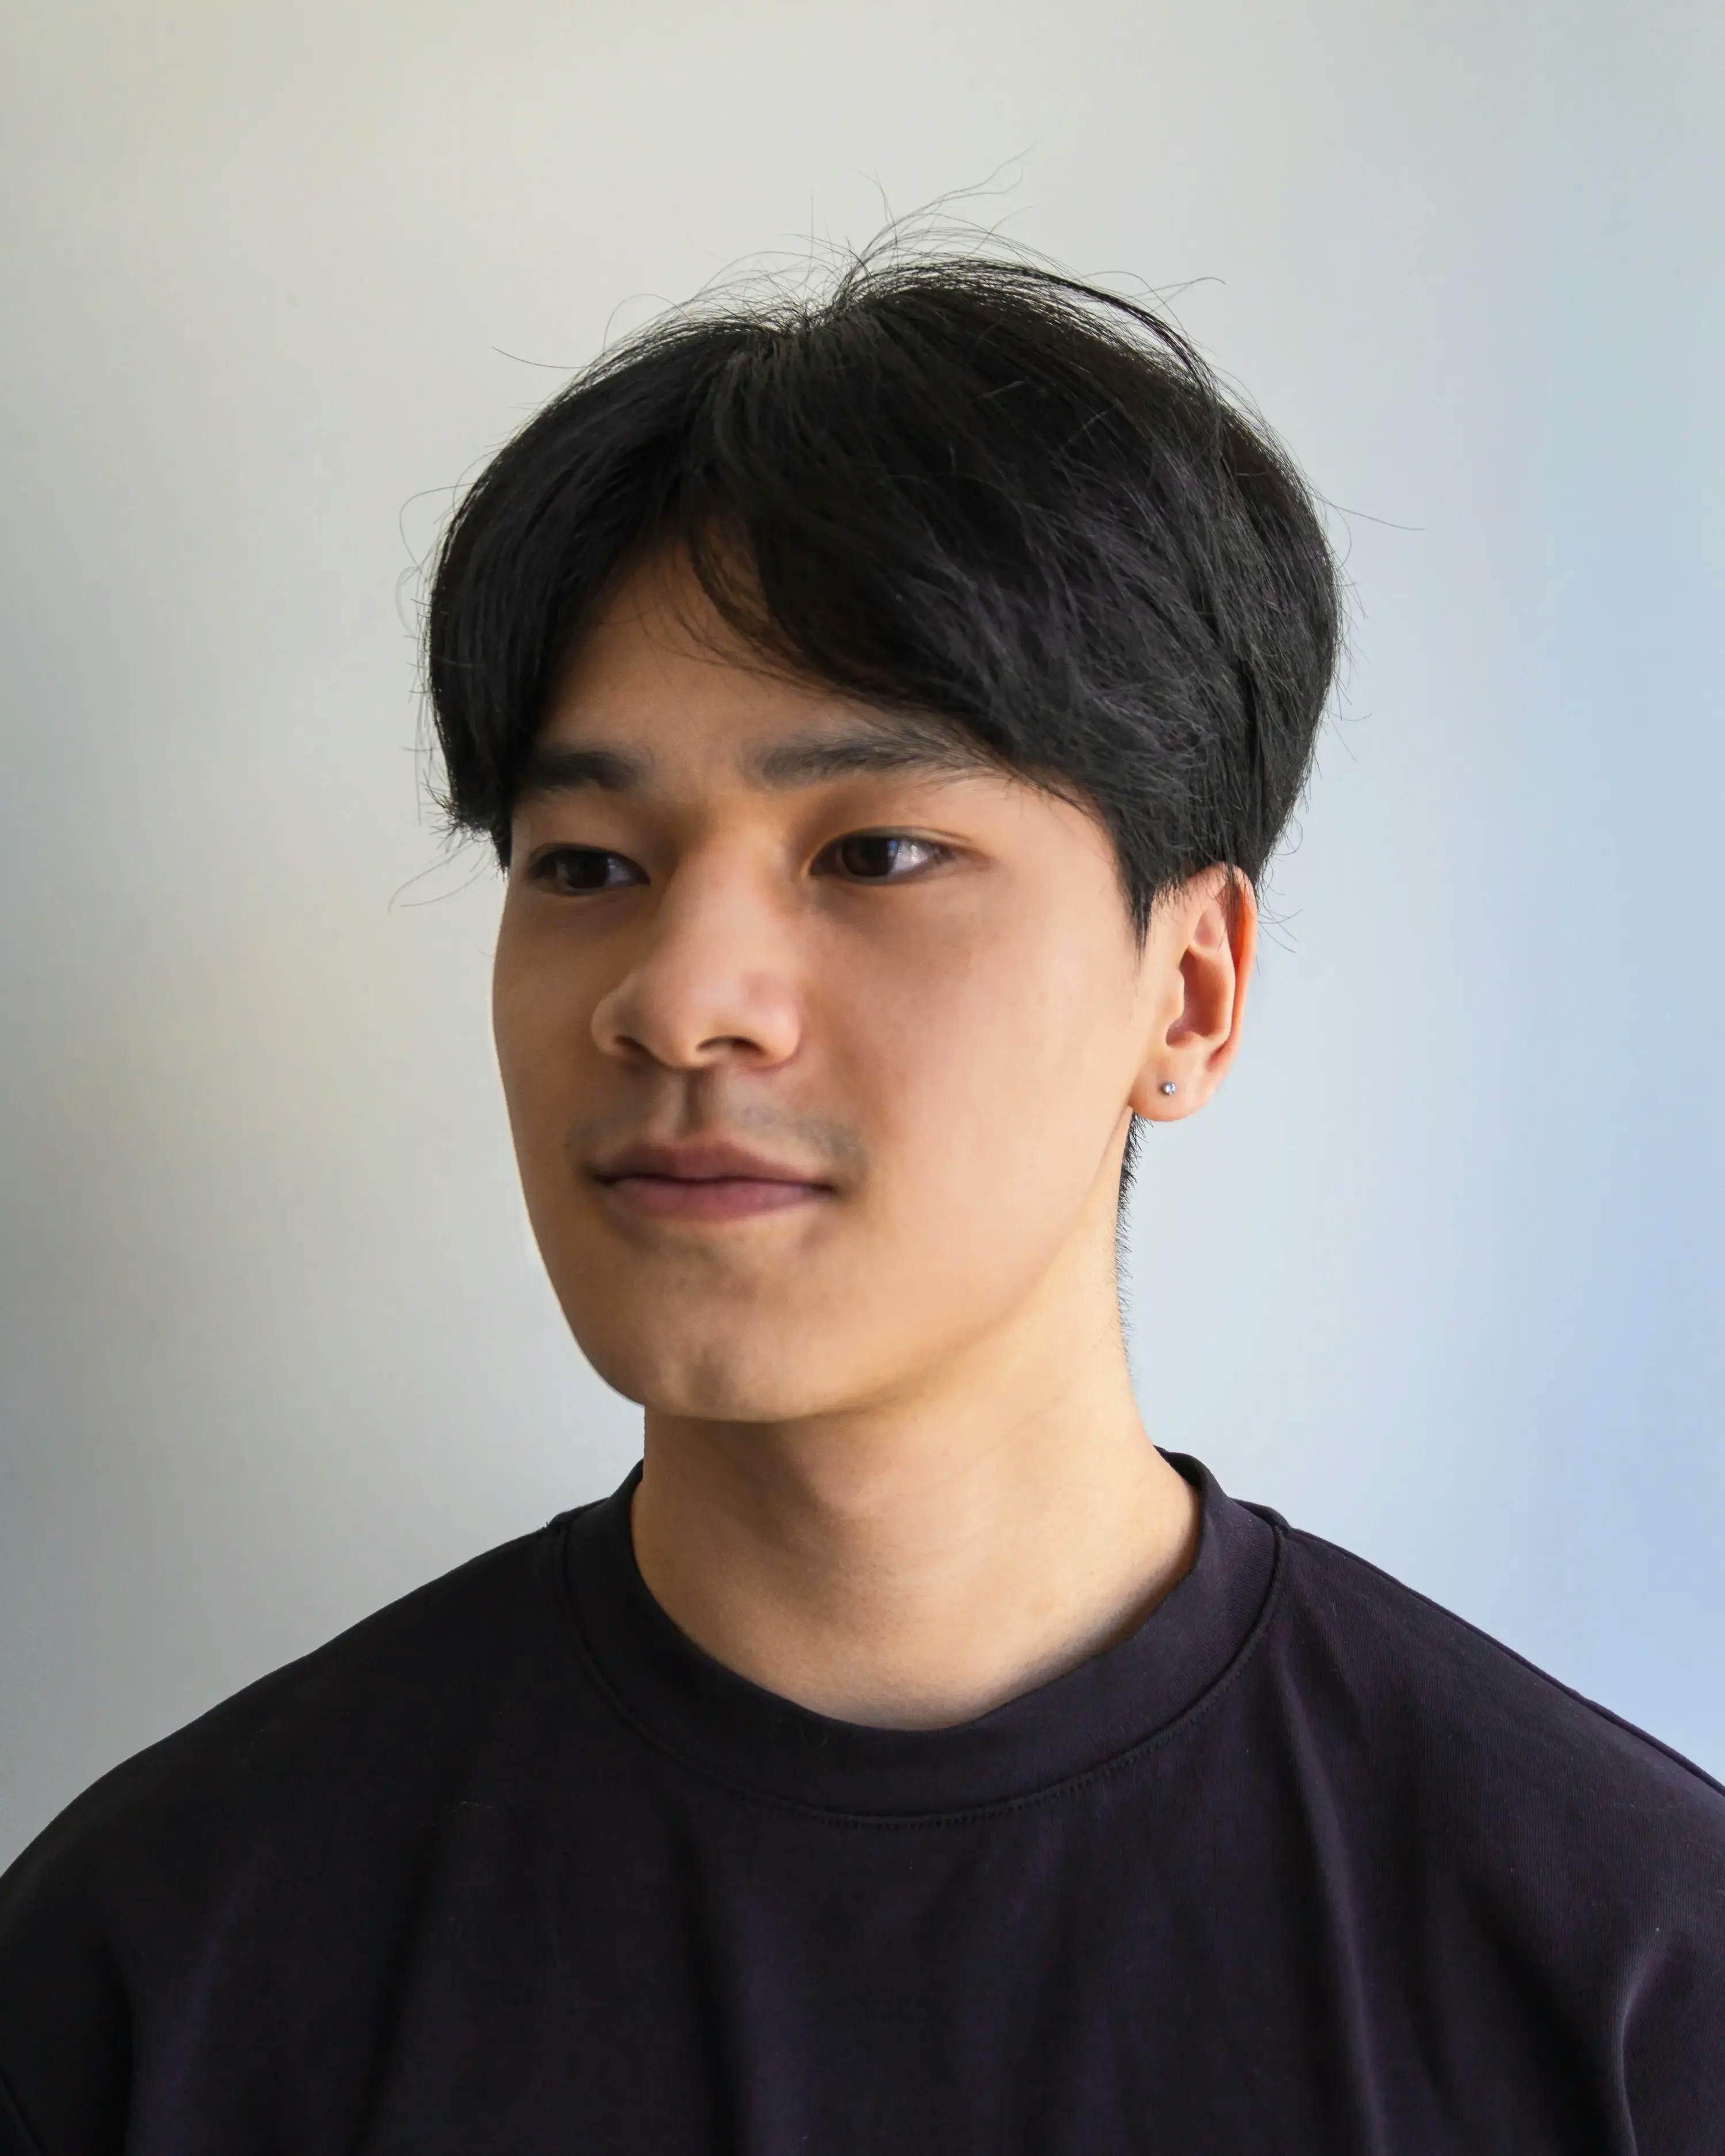 Headshot of Huy wearing a black tshirt against a white background